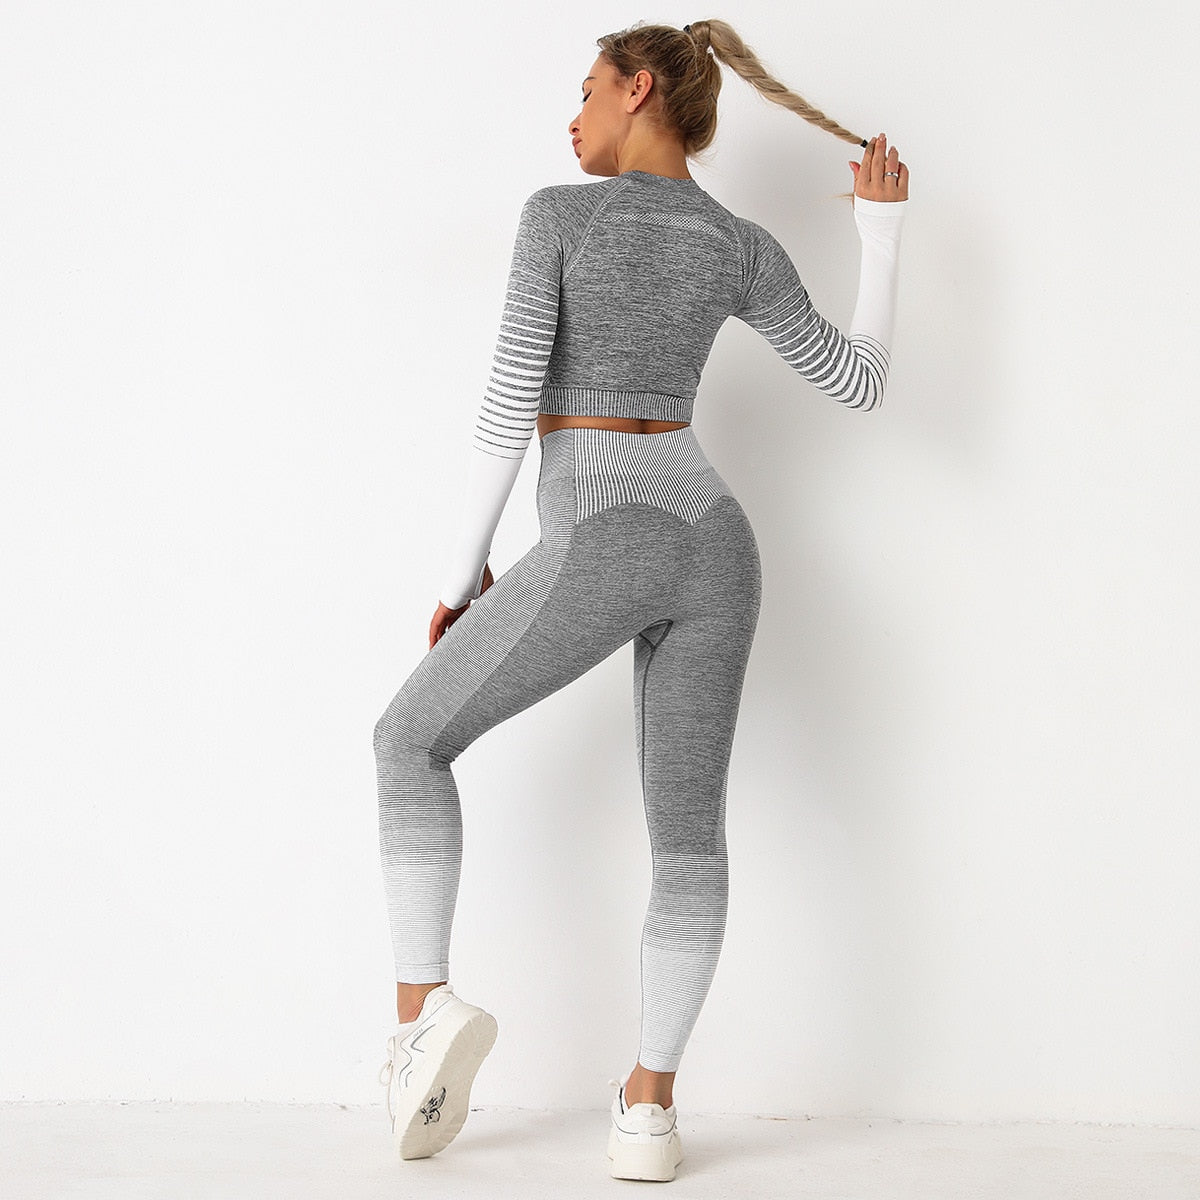 Striped Women's Yoga Sets Anti-Shrink Long-sleeved Sports Top Sexy Hip Lift Buttocks Tight Leggings Gradient Color Suits